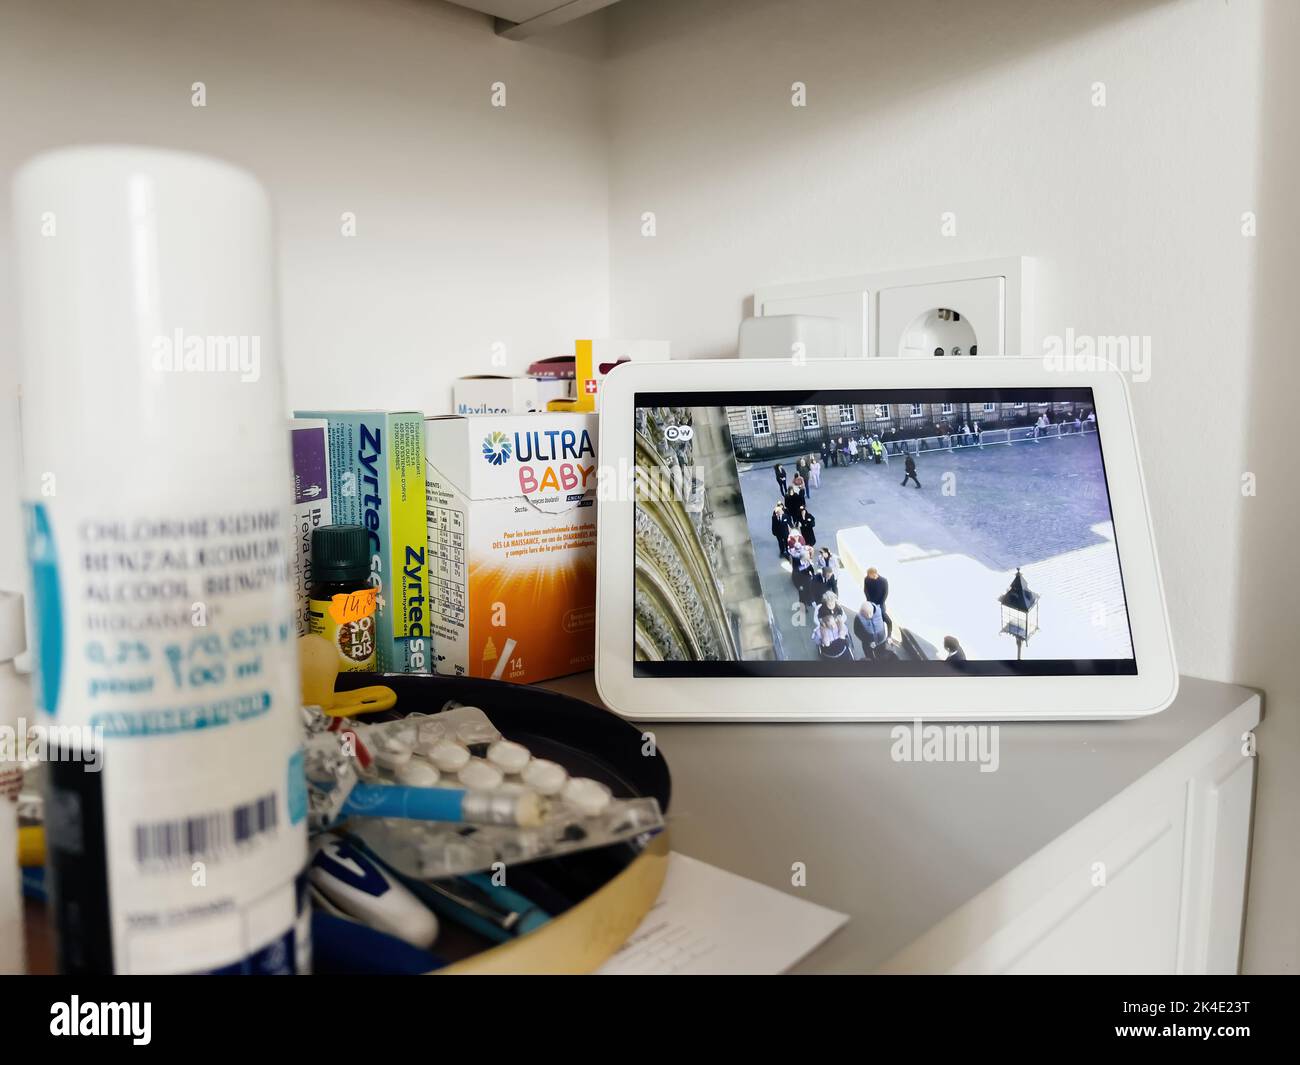 Paris, France - Sep 13, 2022: Kitchen room detail with Amazon Alexa Echo display transmitting live DW Deutsche Well live stream of the funerals of Elizabeth II, Queen of the United Kingdom and the other Commonwealth Stock Photo